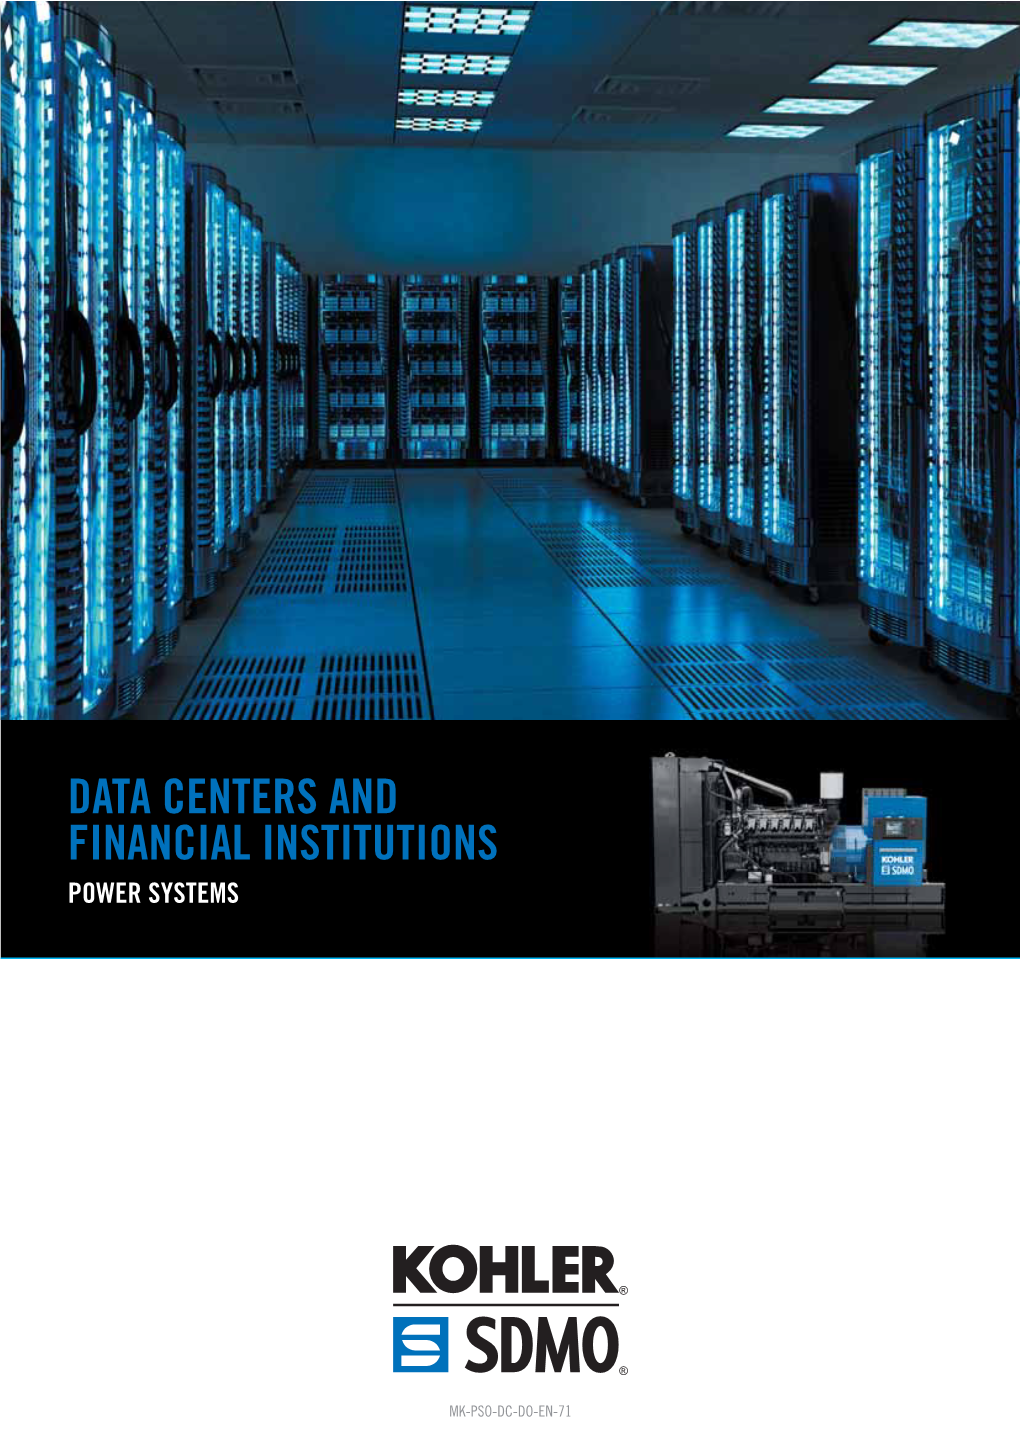 Data Centers and Financial Institutions Power Systems